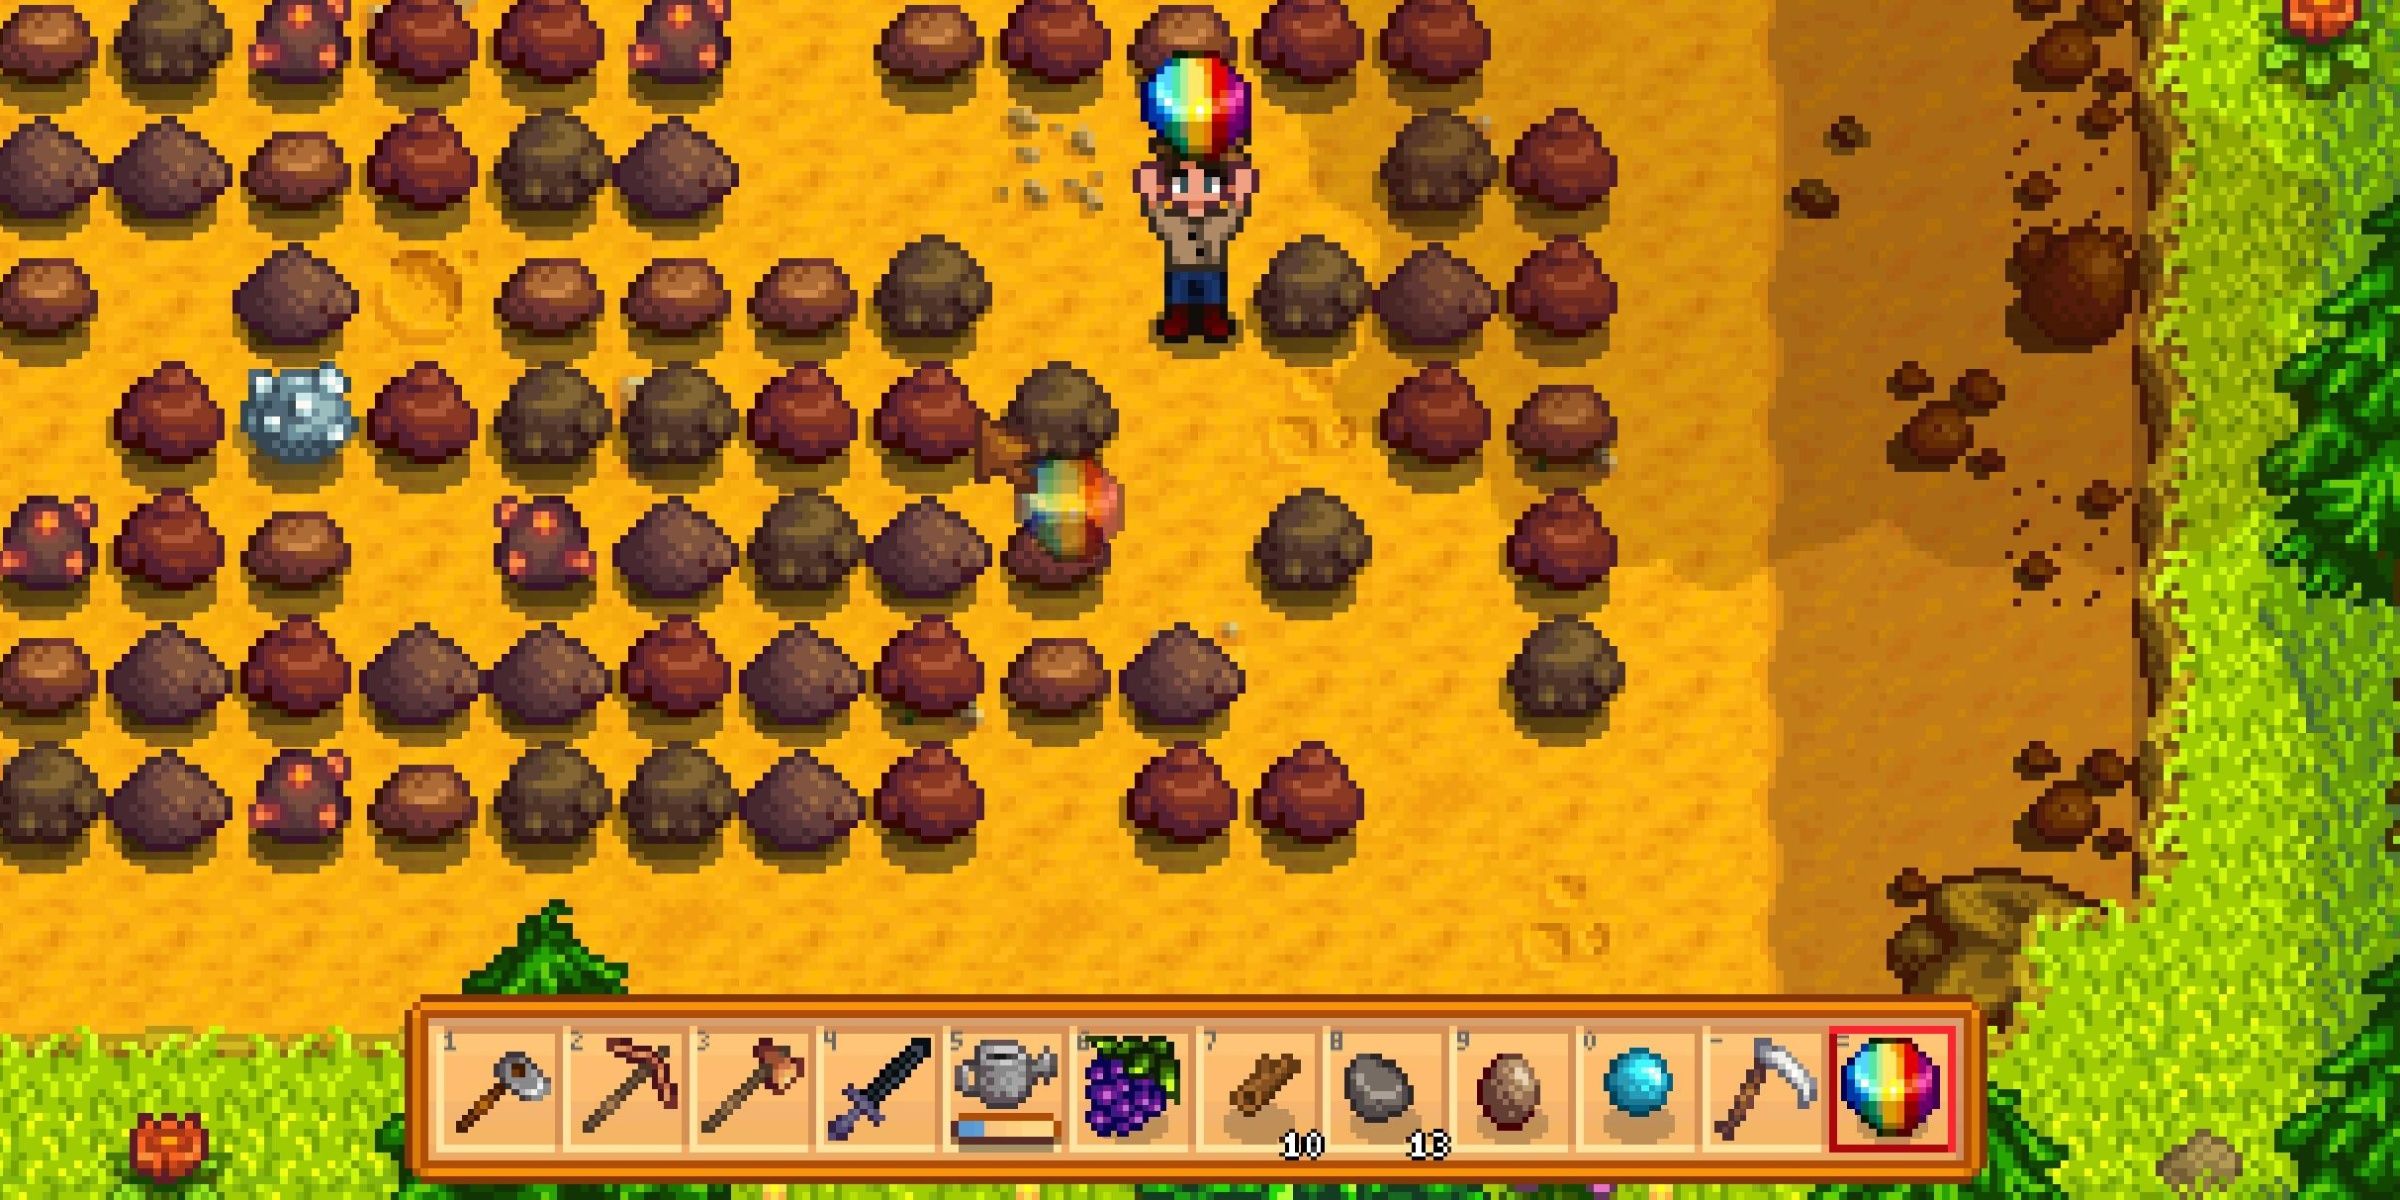 Stardew Valley player with Prismatic Shard